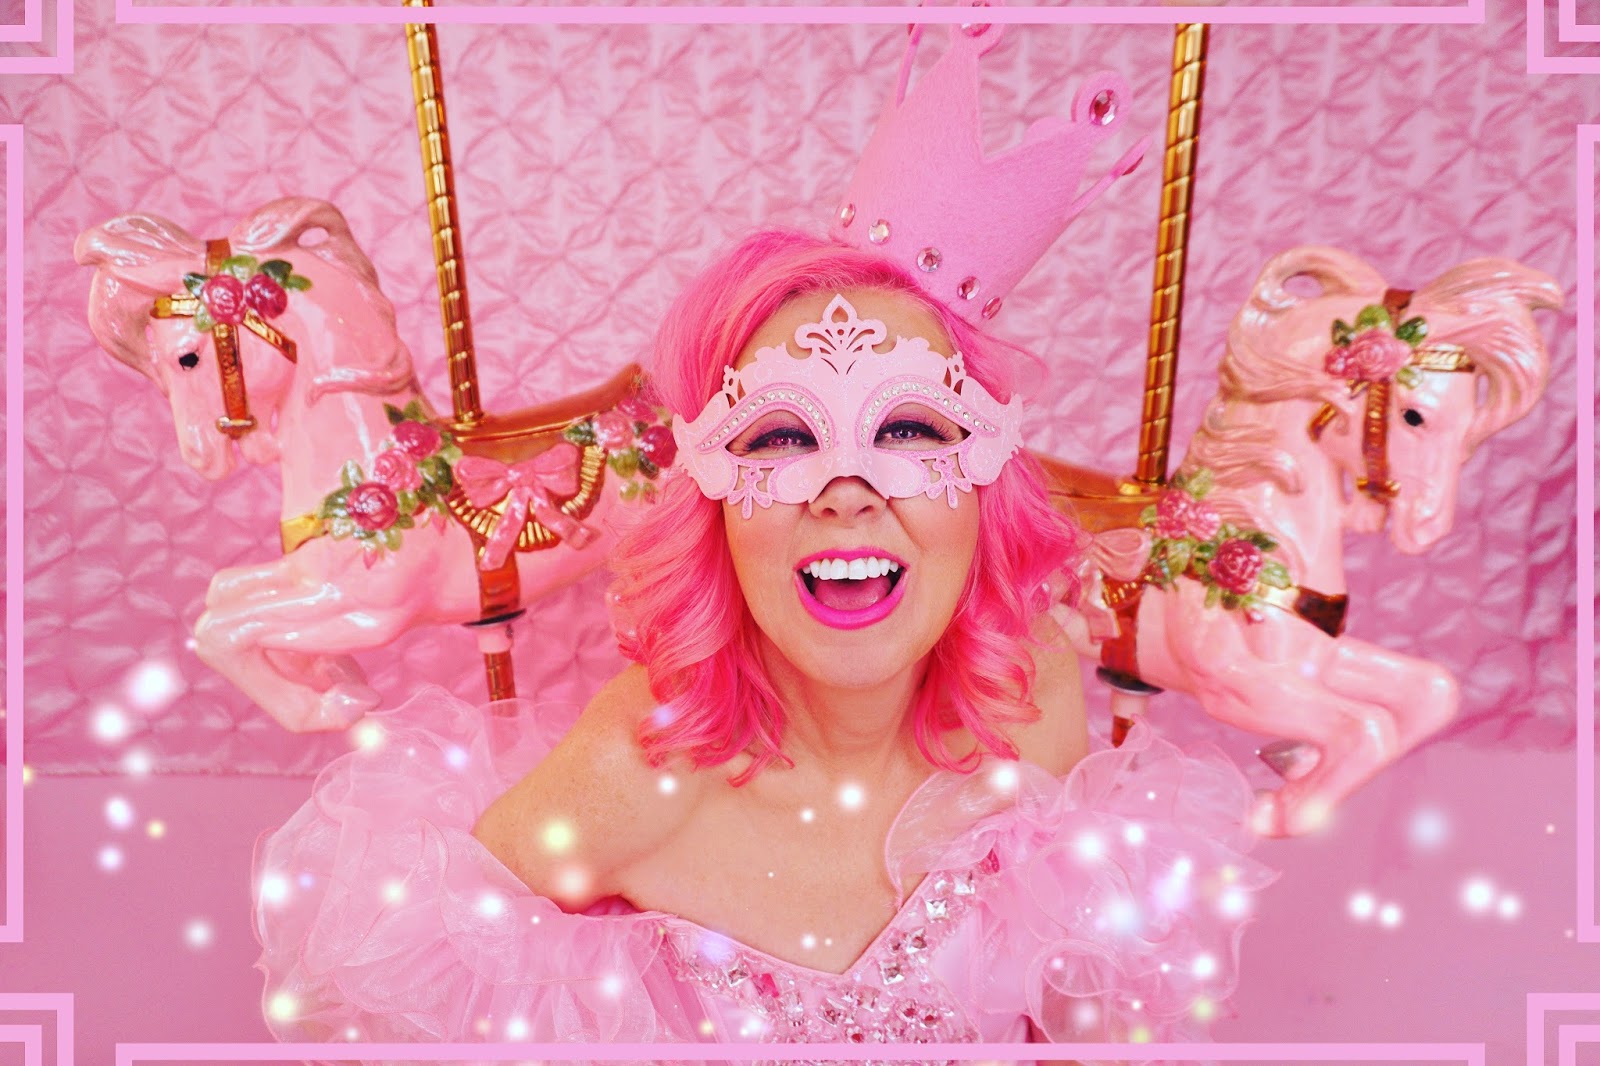 The Pink Lady Of Hollywood Is Kitten Kay Sera Photo Shoot From 